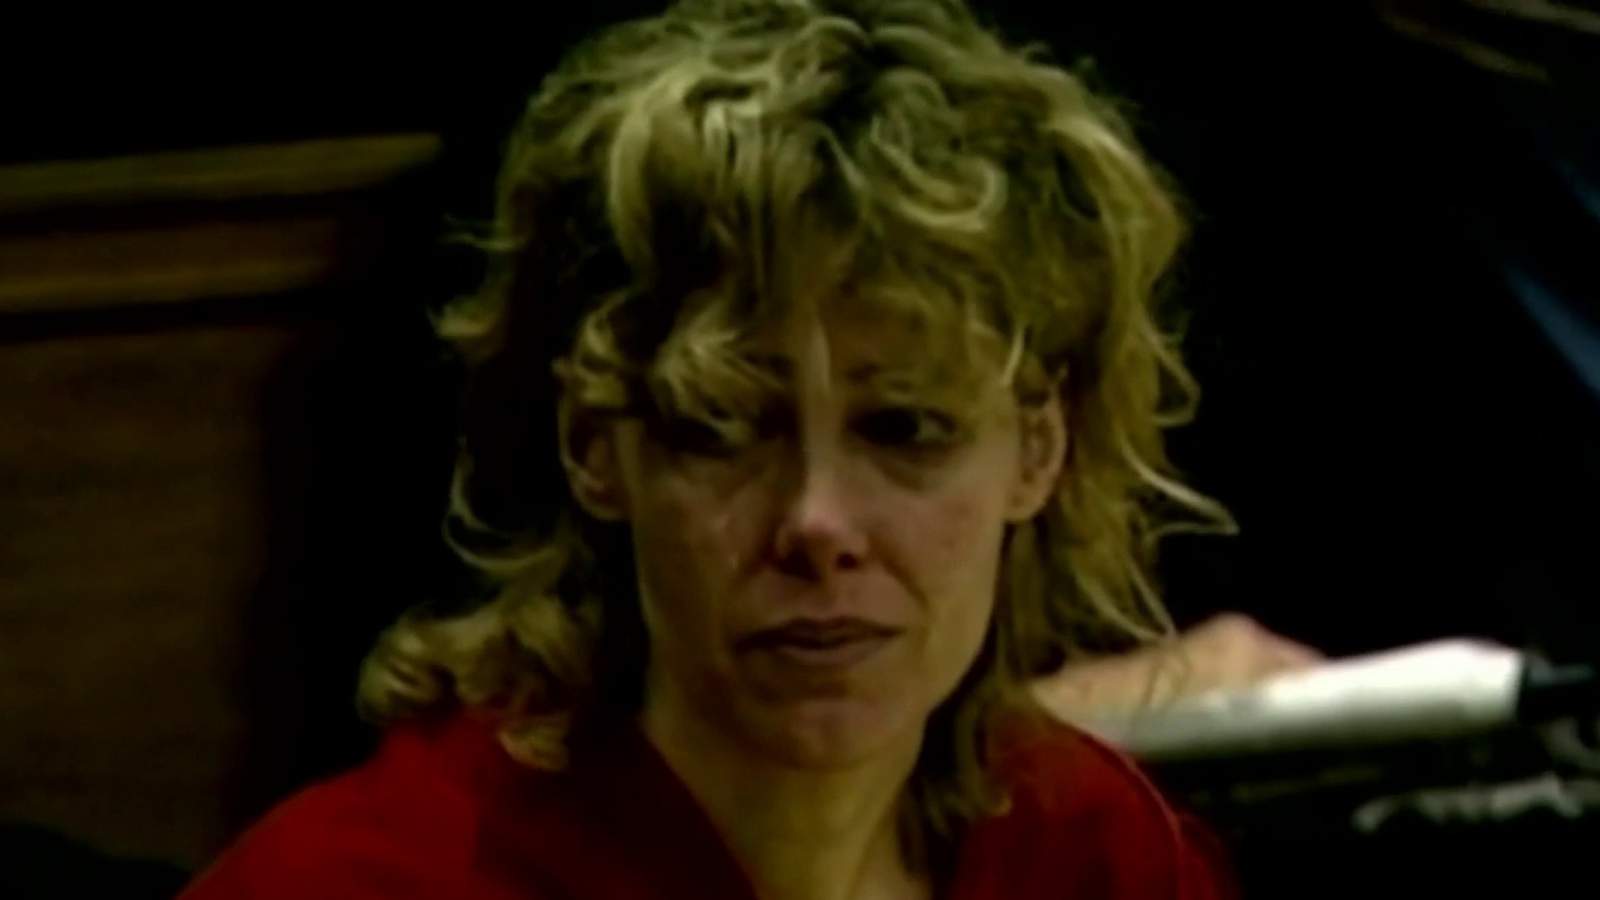 Mary Kay Letourneau, convicted of raping 13-year-old student she later married, dies